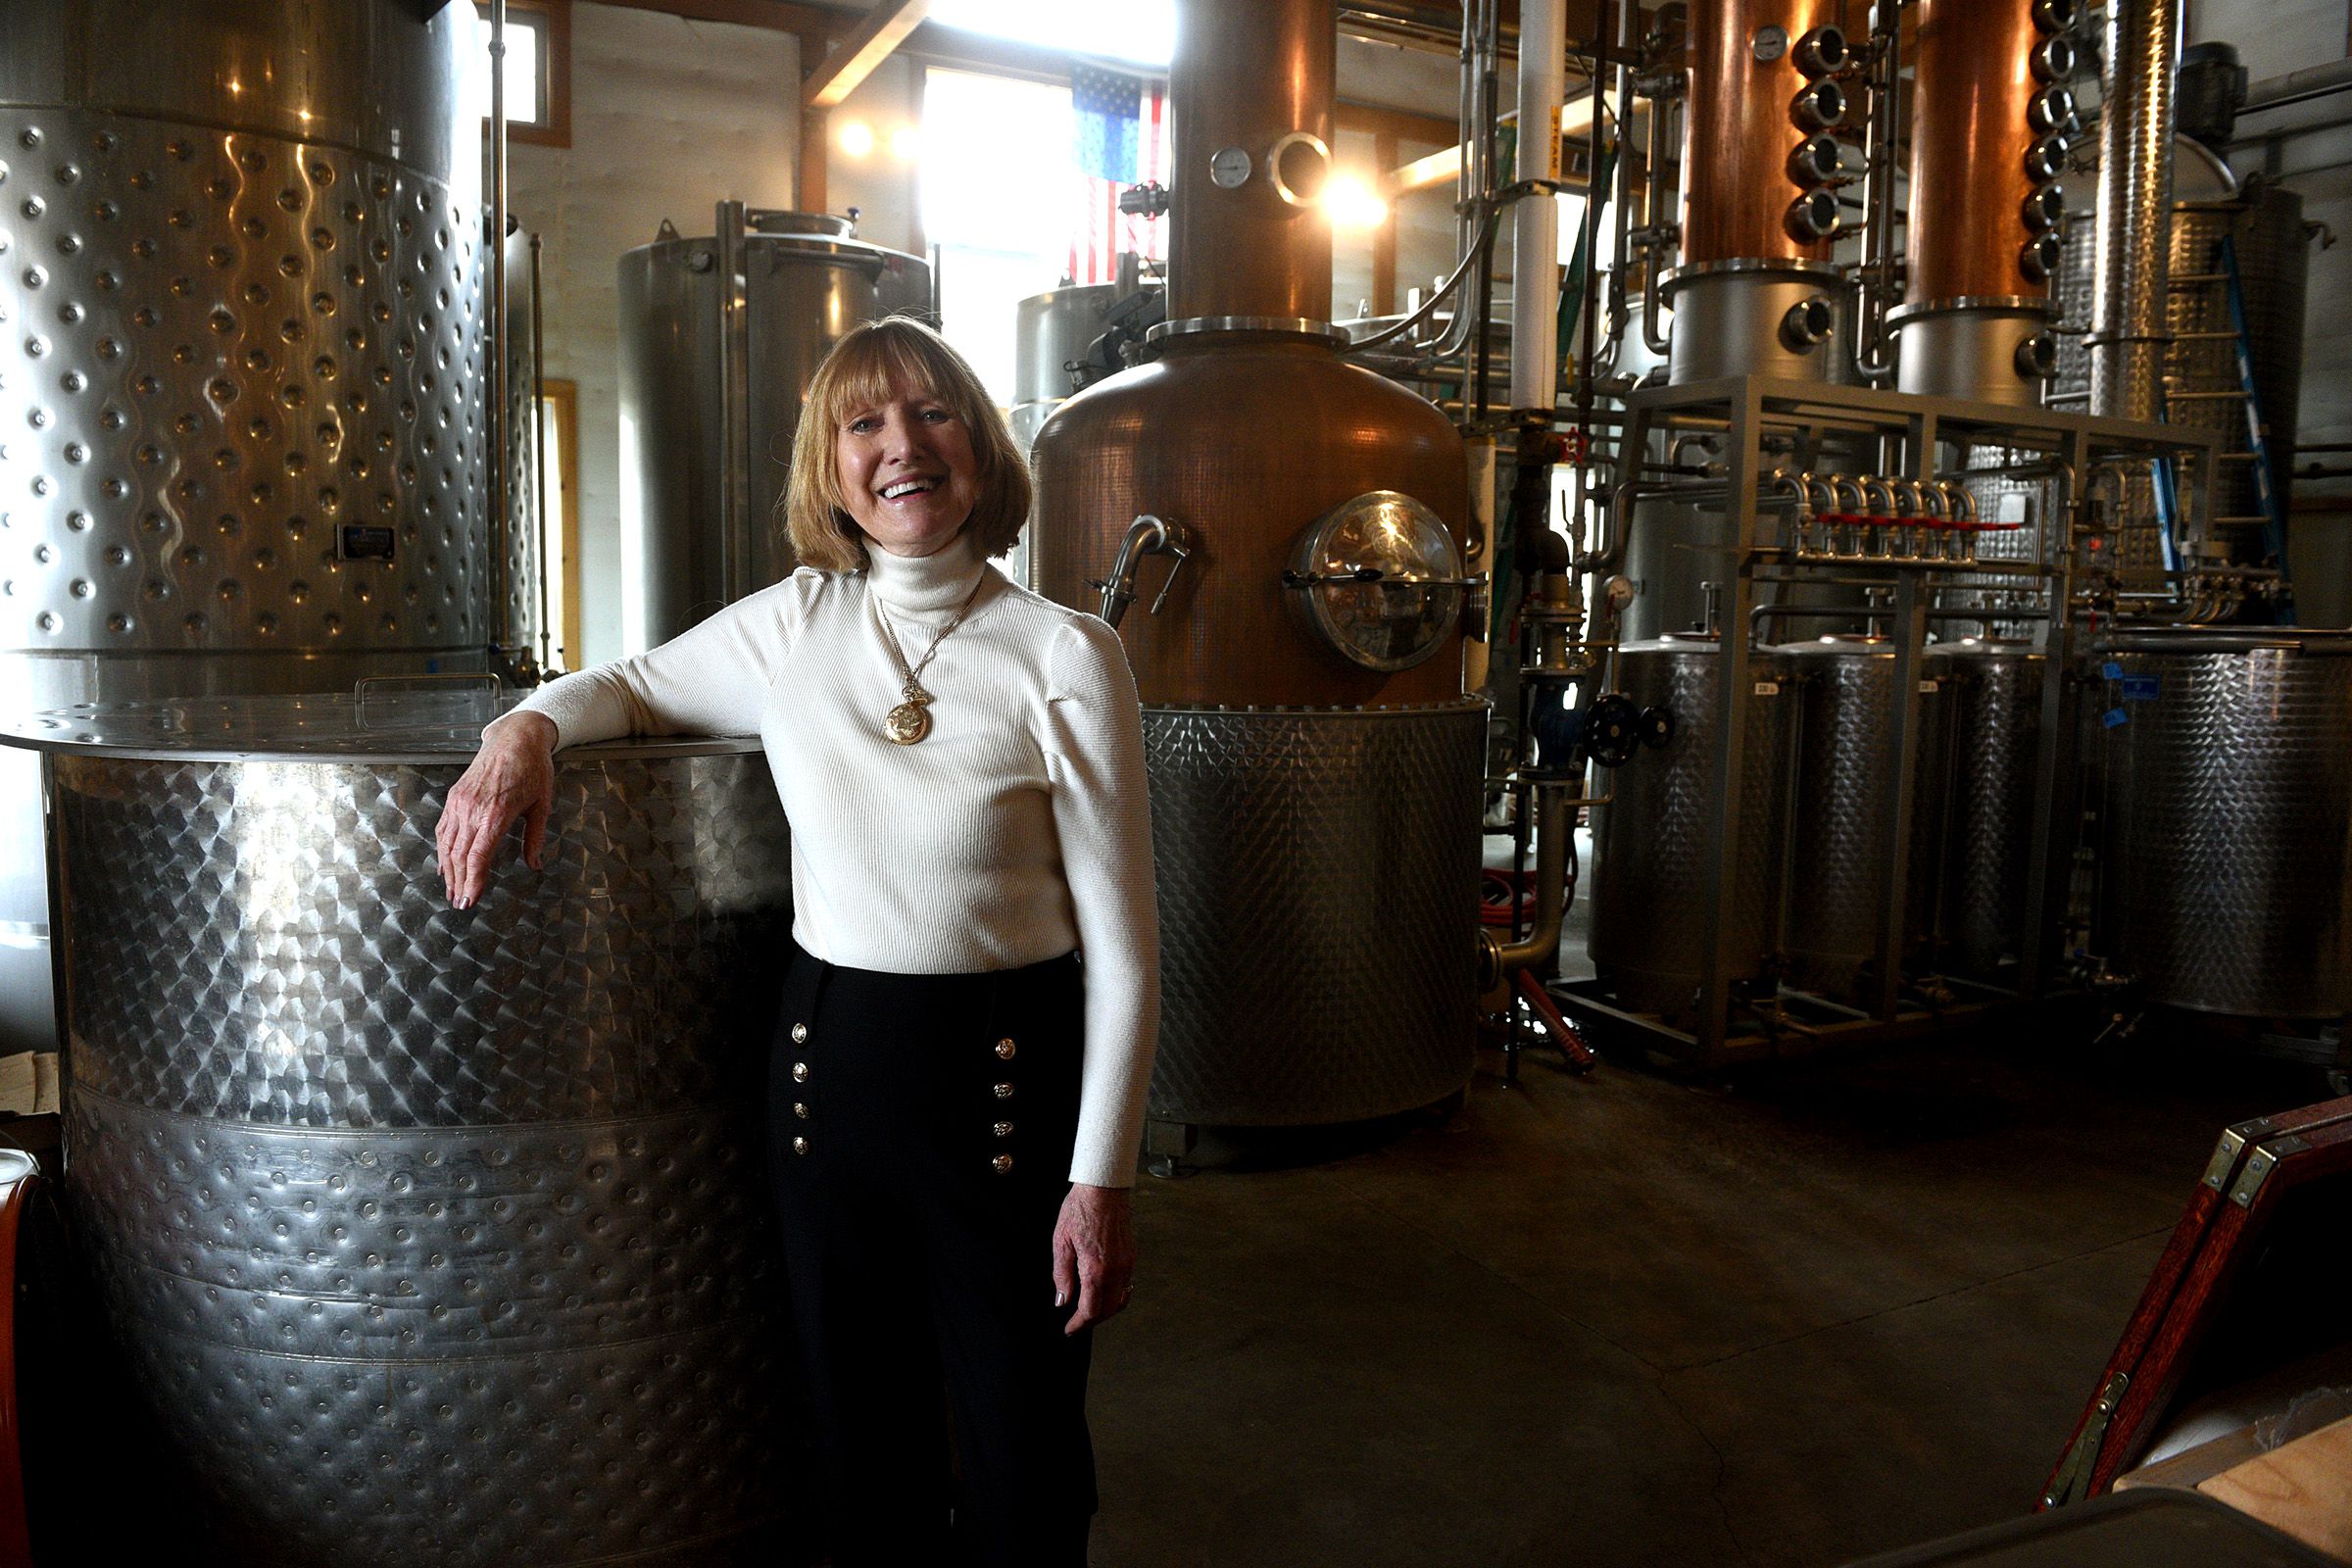 Anne Marie Delaney, co-owner of Silo Distillery, in the production room on Friday, March 31, 2023 in Windsor, Vt.  (Valley News - Jennifer Hauck) Copyright Valley News. May not be reprinted or used online without permission. Send requests to permission@vnews.com.